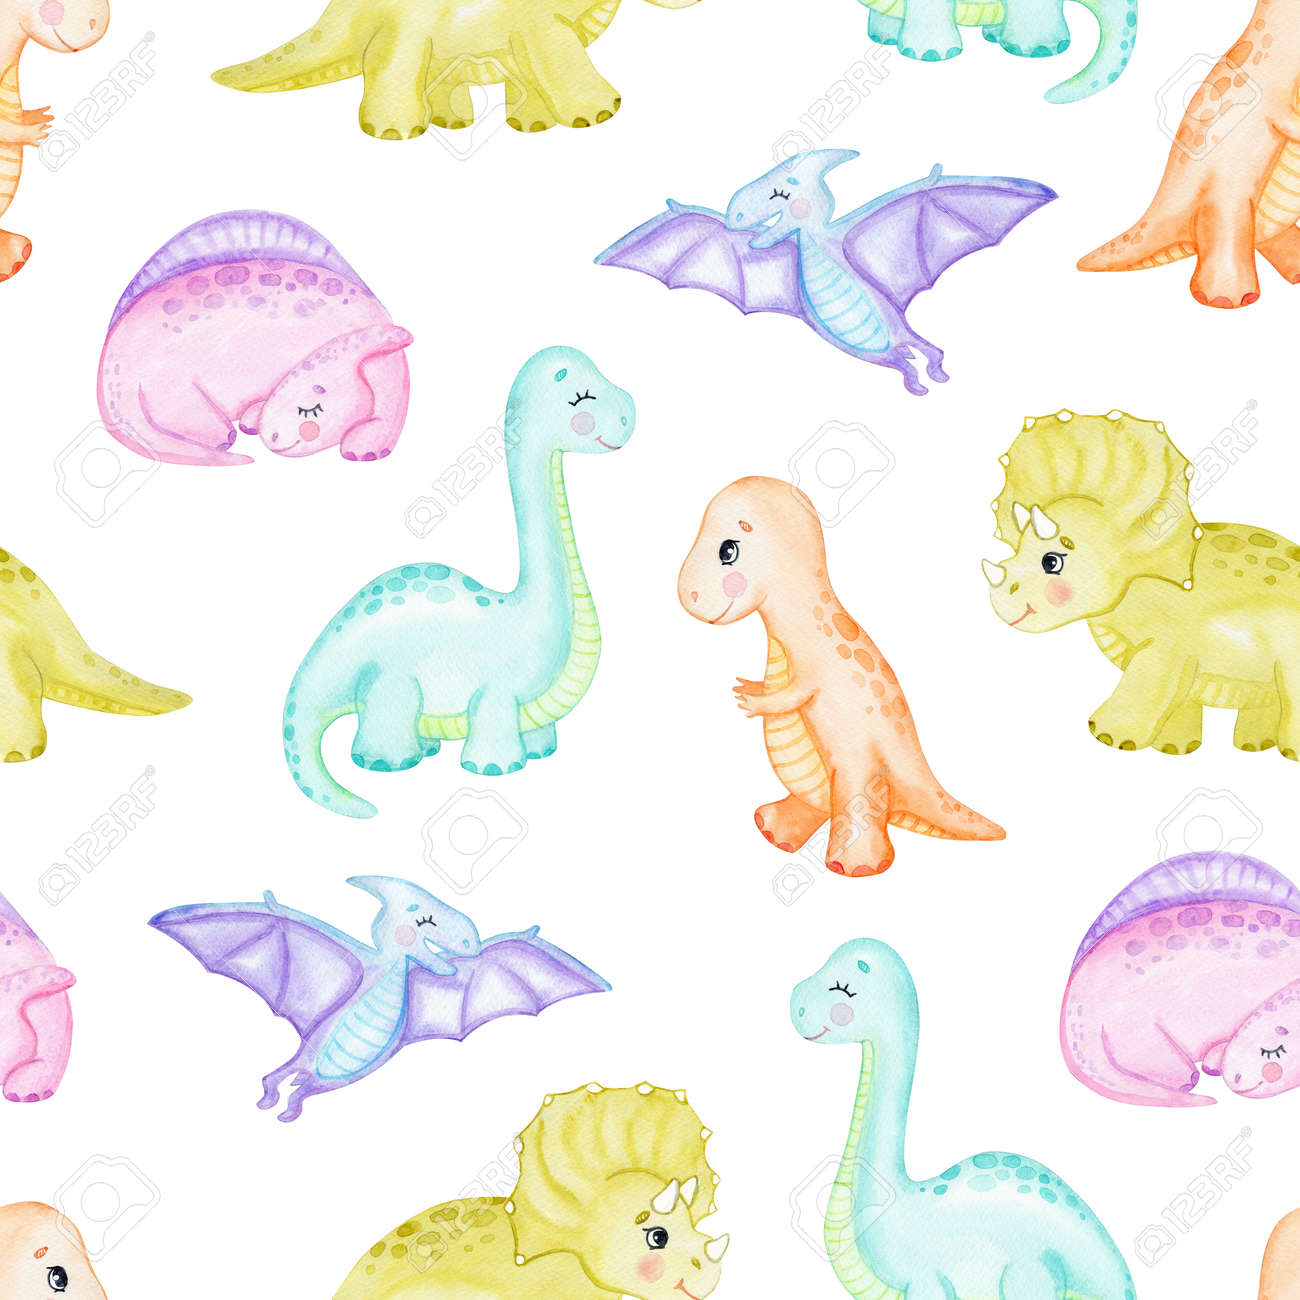 Watercolor Baby Dinosaur Seamless Pattern On White Background